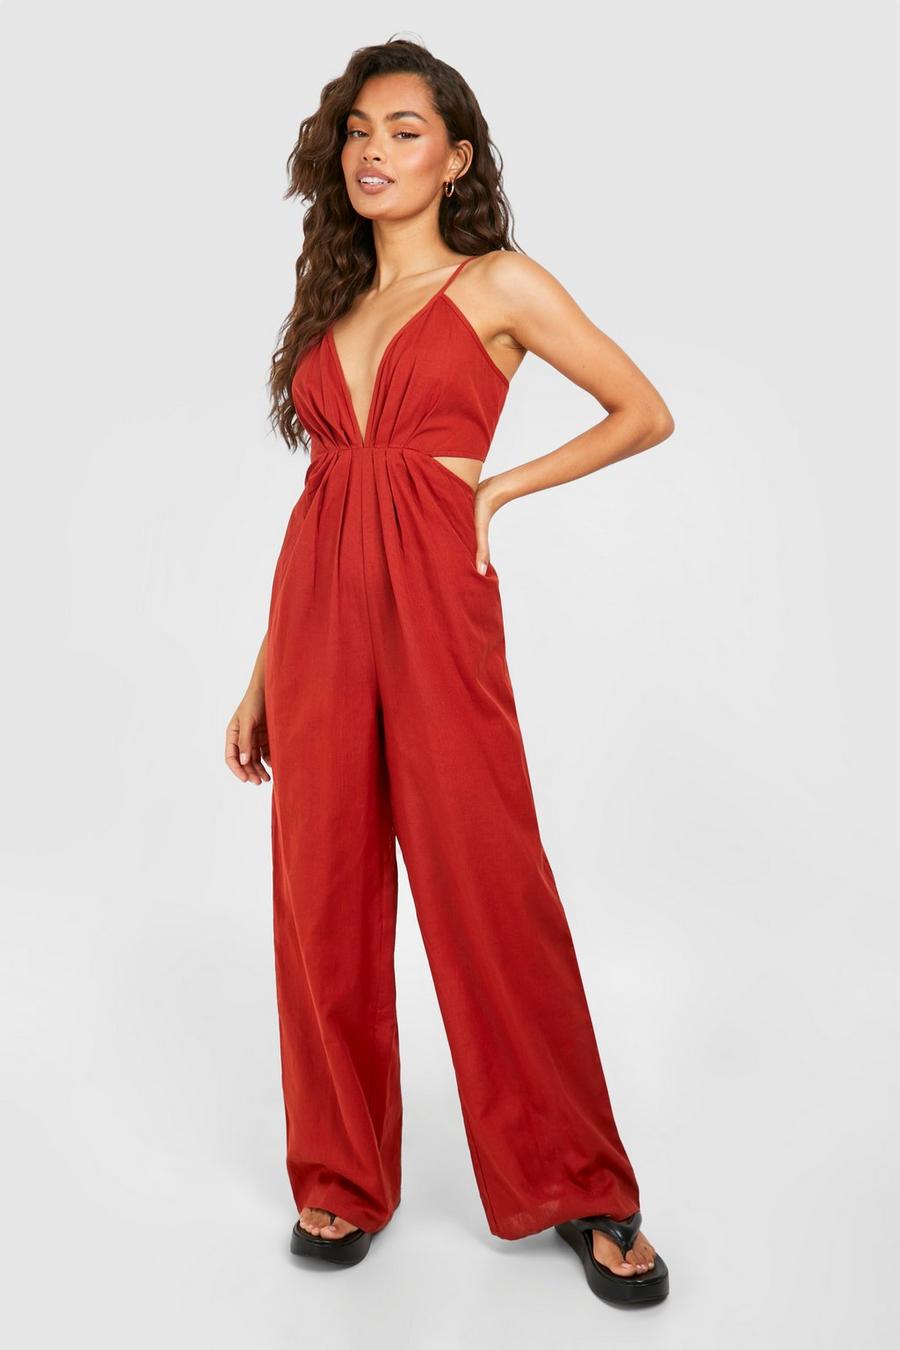 Red Linen Strappy Cut Out Jumpsuit 